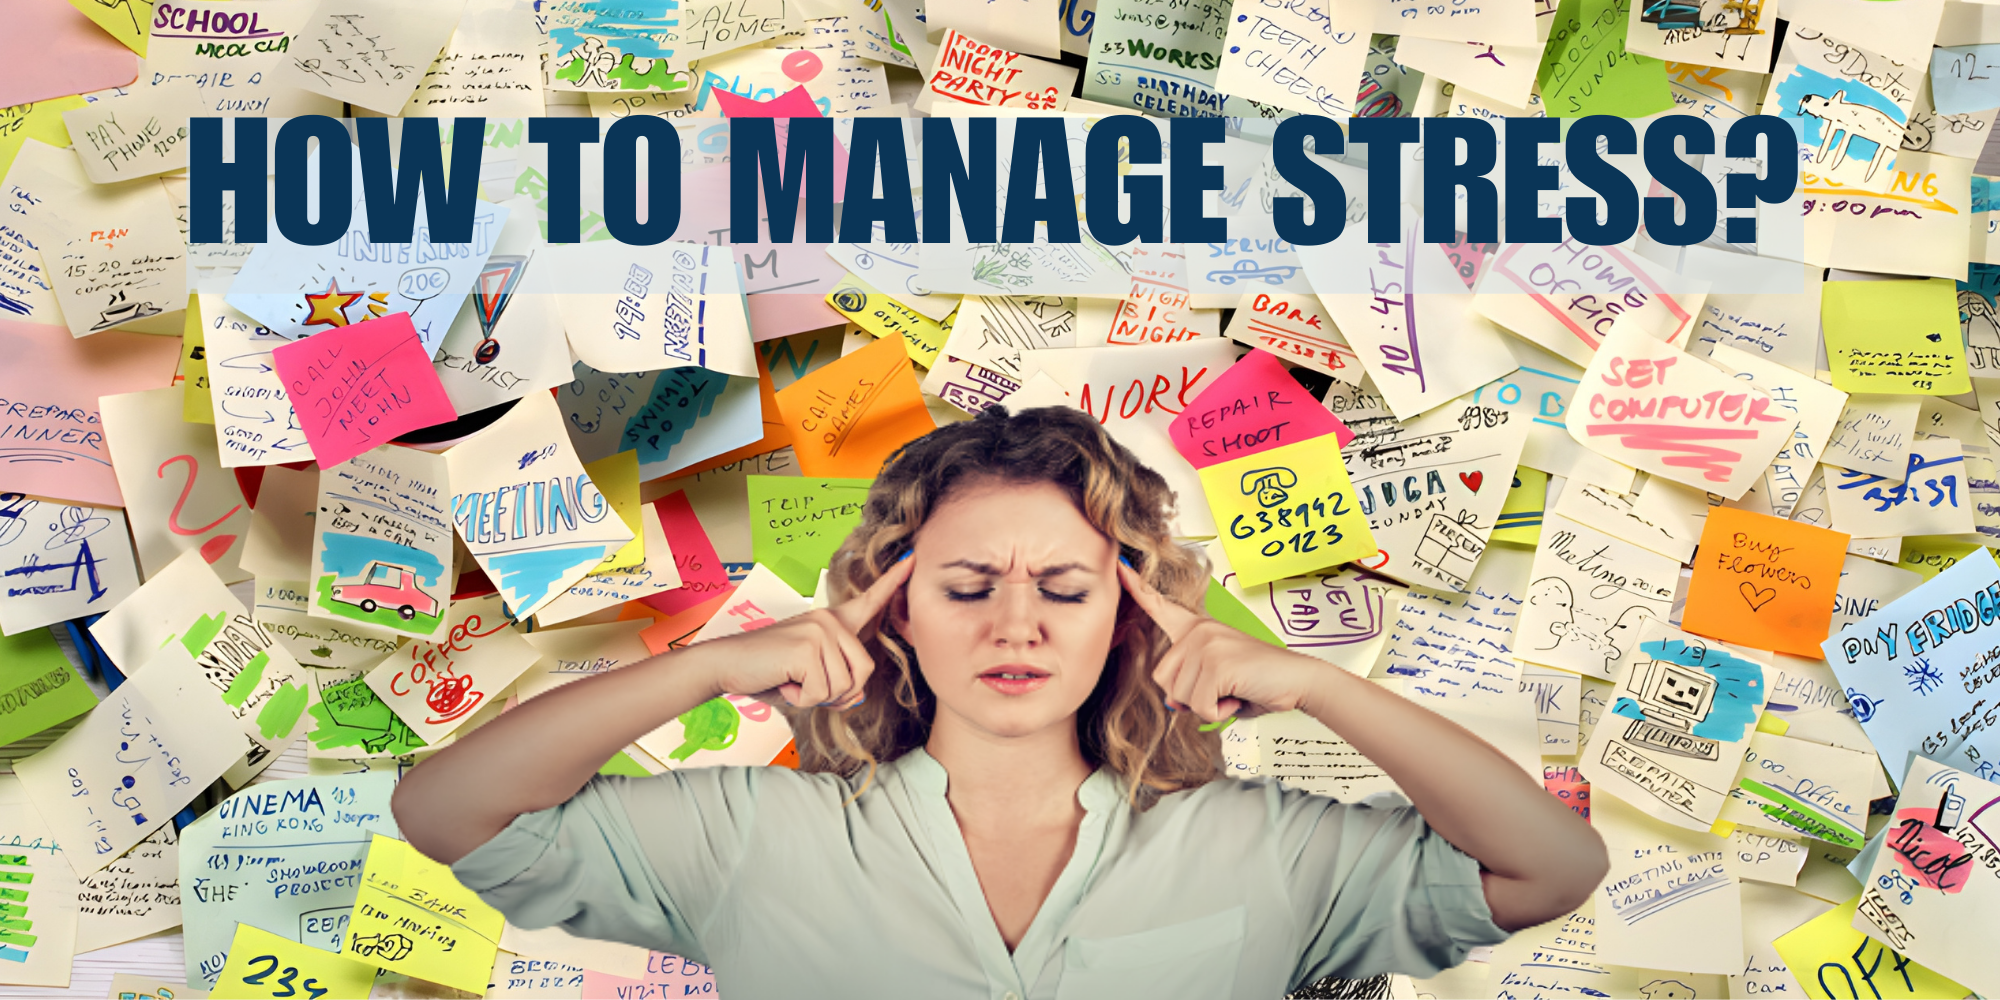 Mindfulness at work: Strategies to reduce workplace stress

